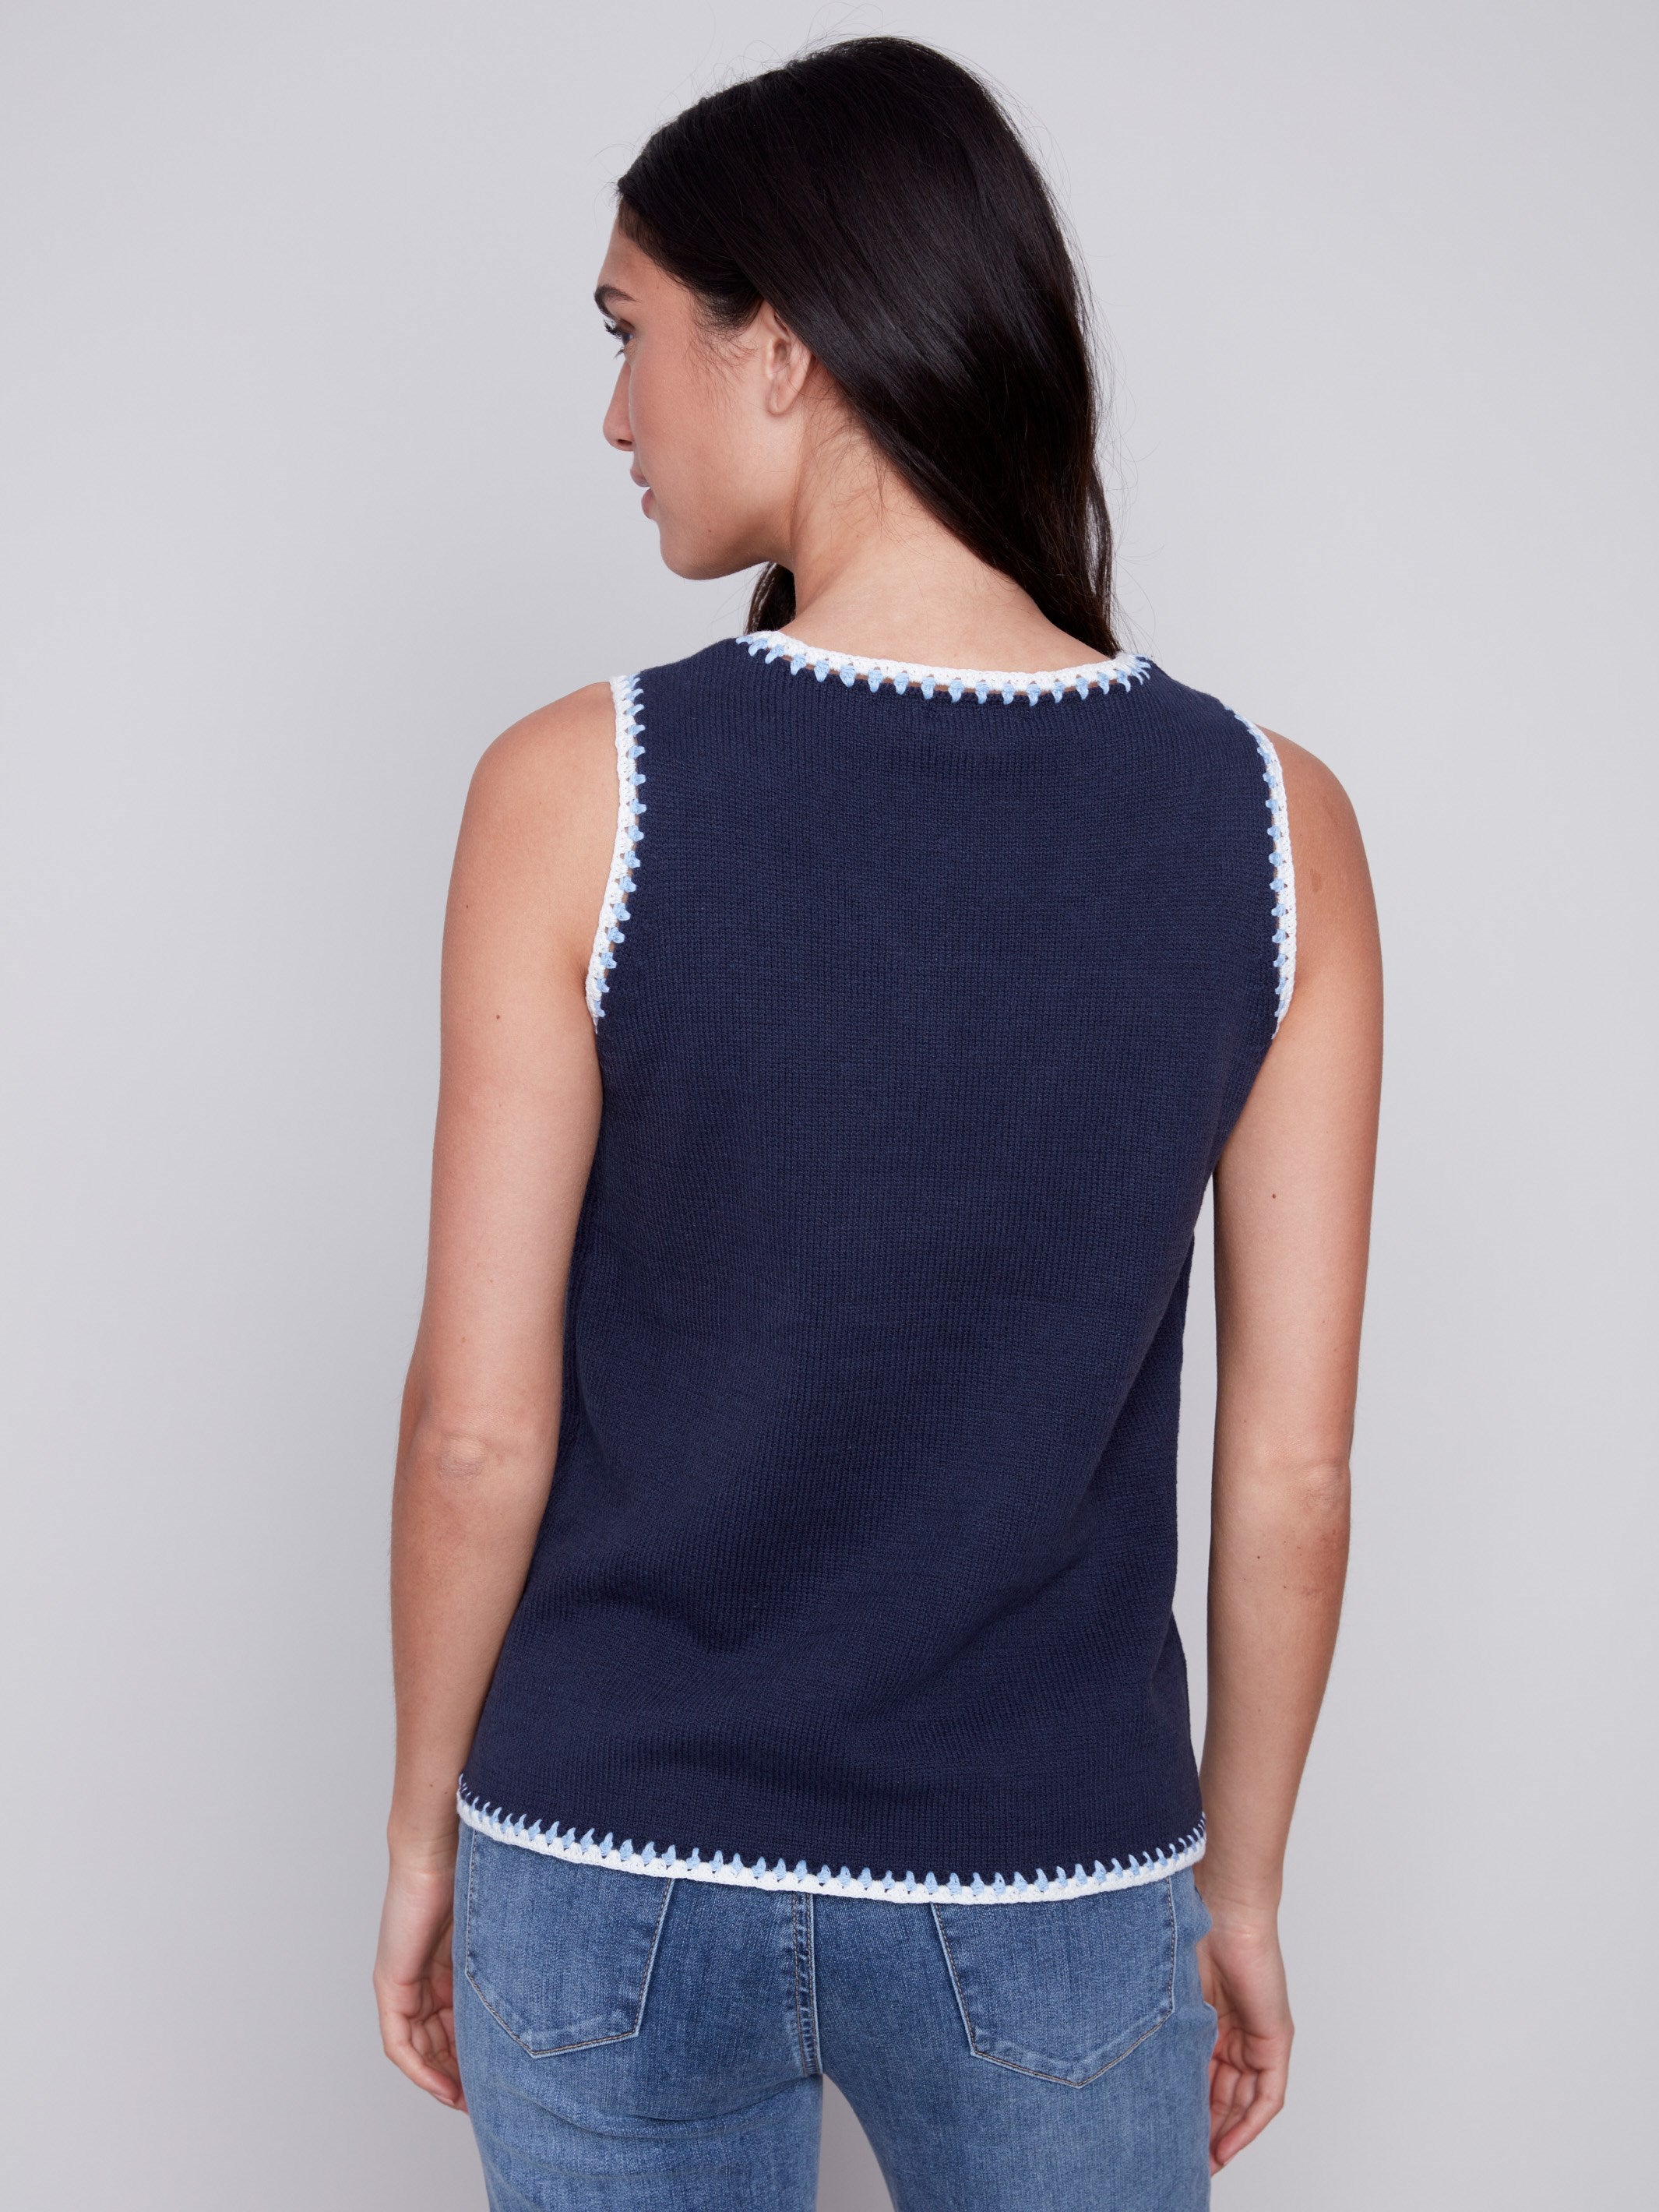 Sleeveless Knit Top with Crochet Detail - Navy - Charlie B Collection Canada - Image 2